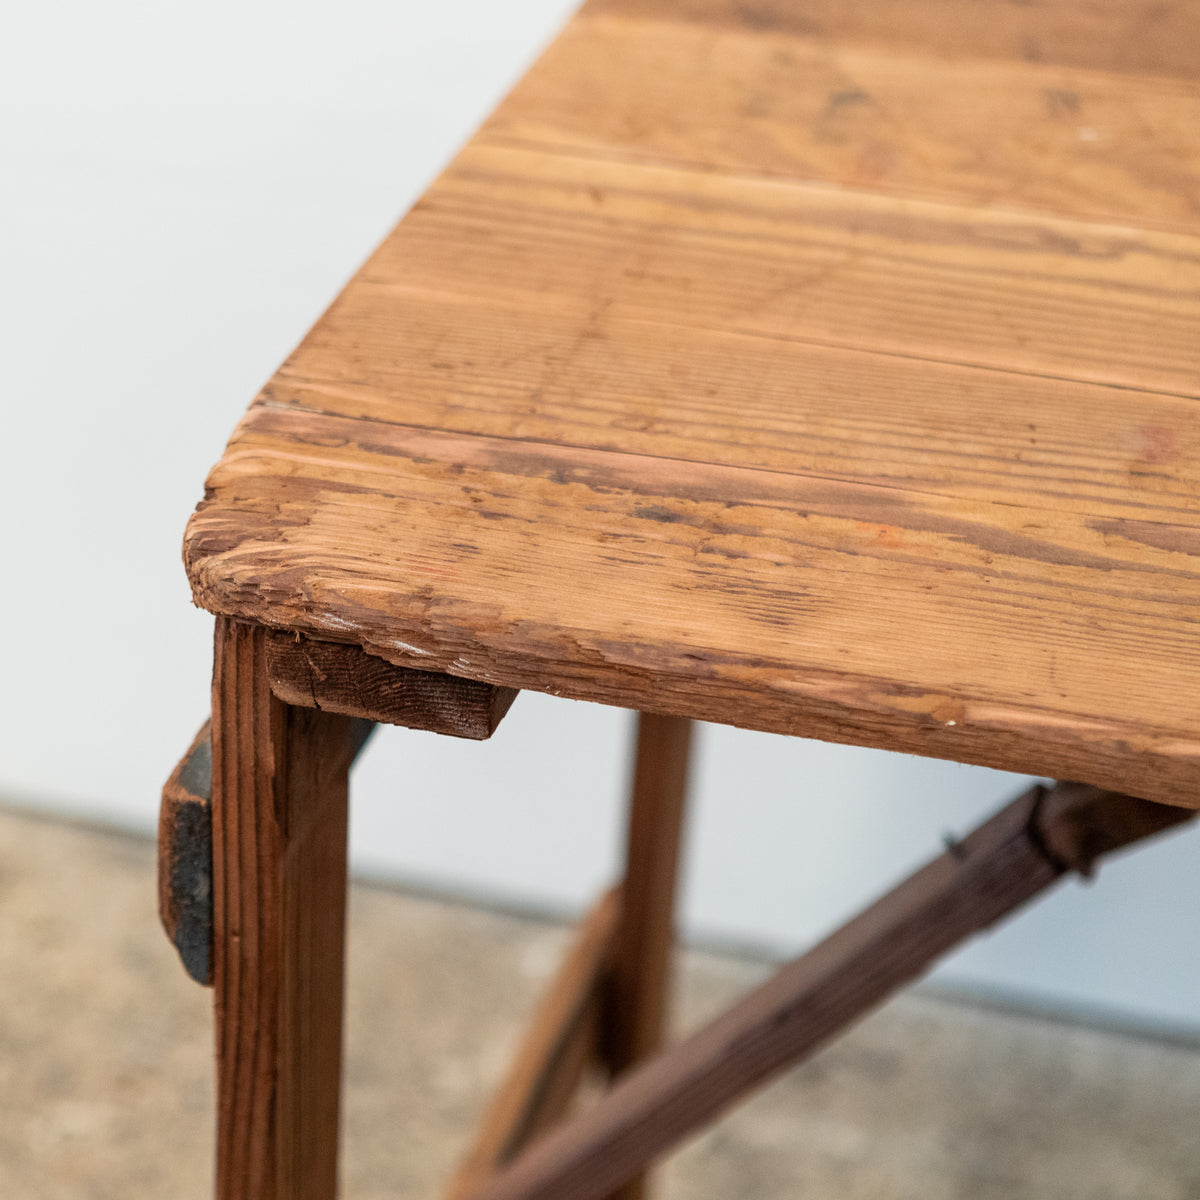 Reclaimed Mid-Century Pine Trestle Tables | The Architectural Forum